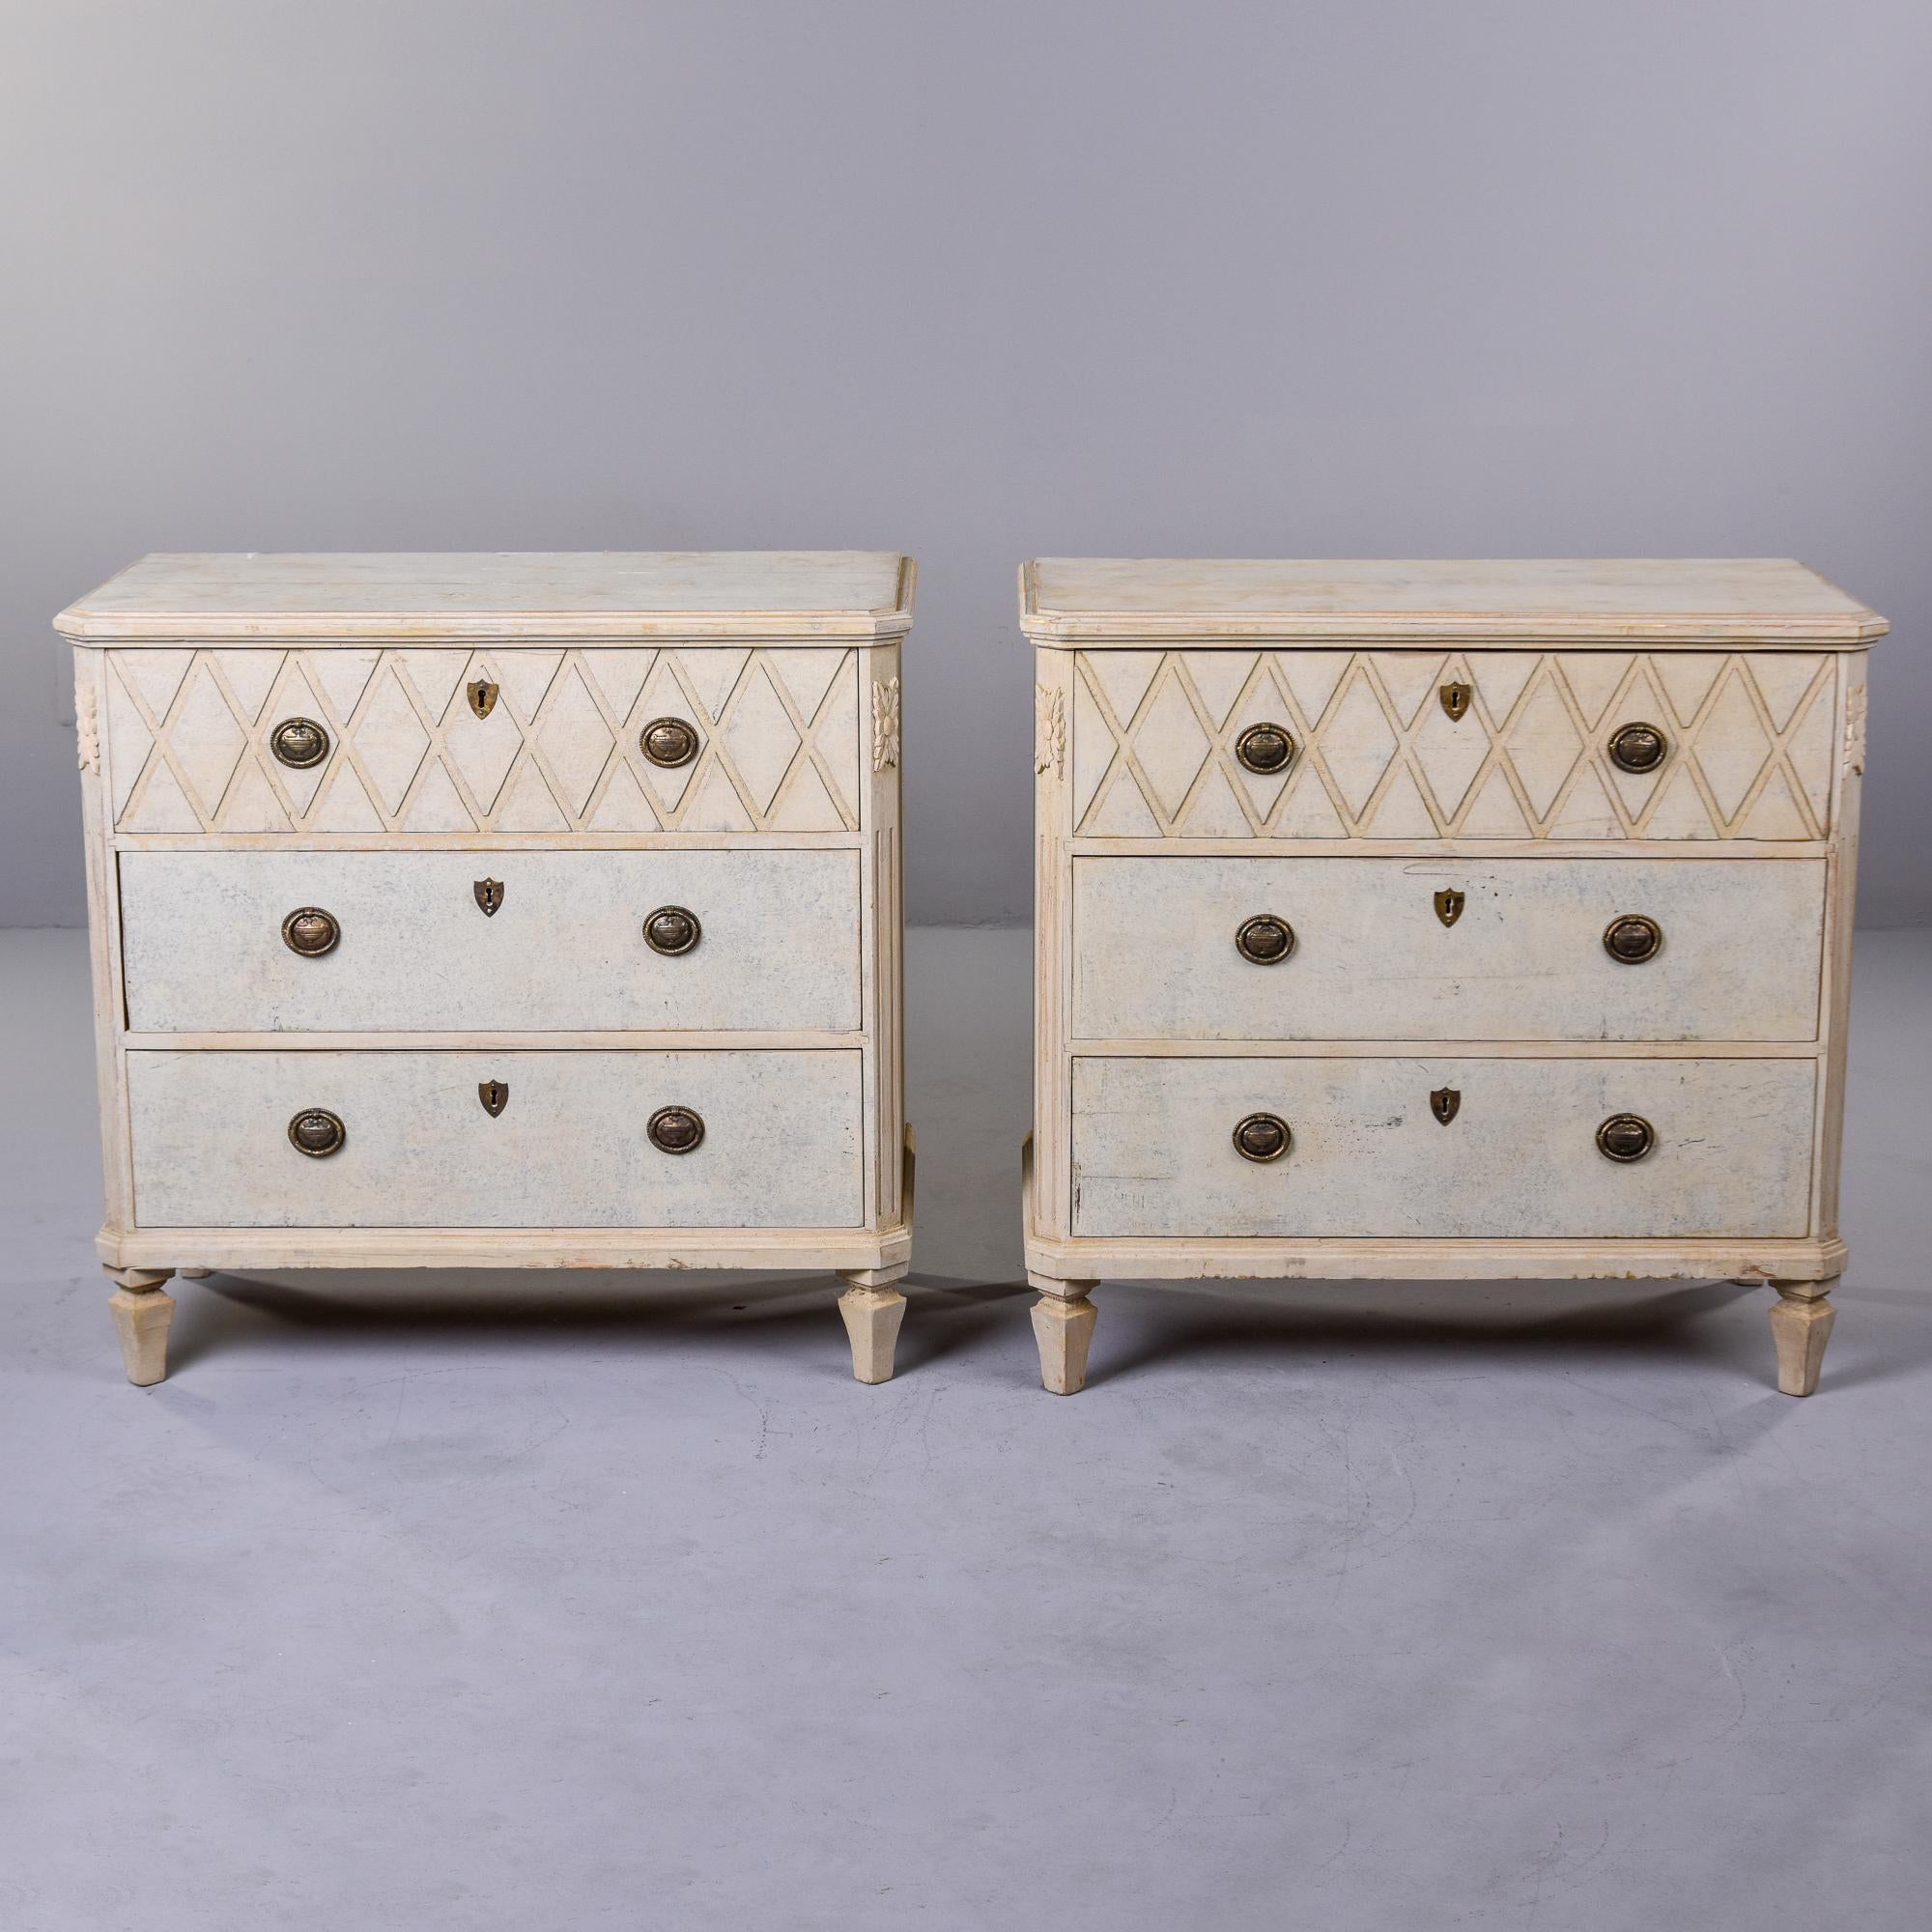 Pair of circa 1880s Swedish three drawer chests with bone colored painted finish. These chests have carved diamond pattern on top drawer fronts, dovetail construction brass pulls and escutcheons and carved medallion details toward the top on the